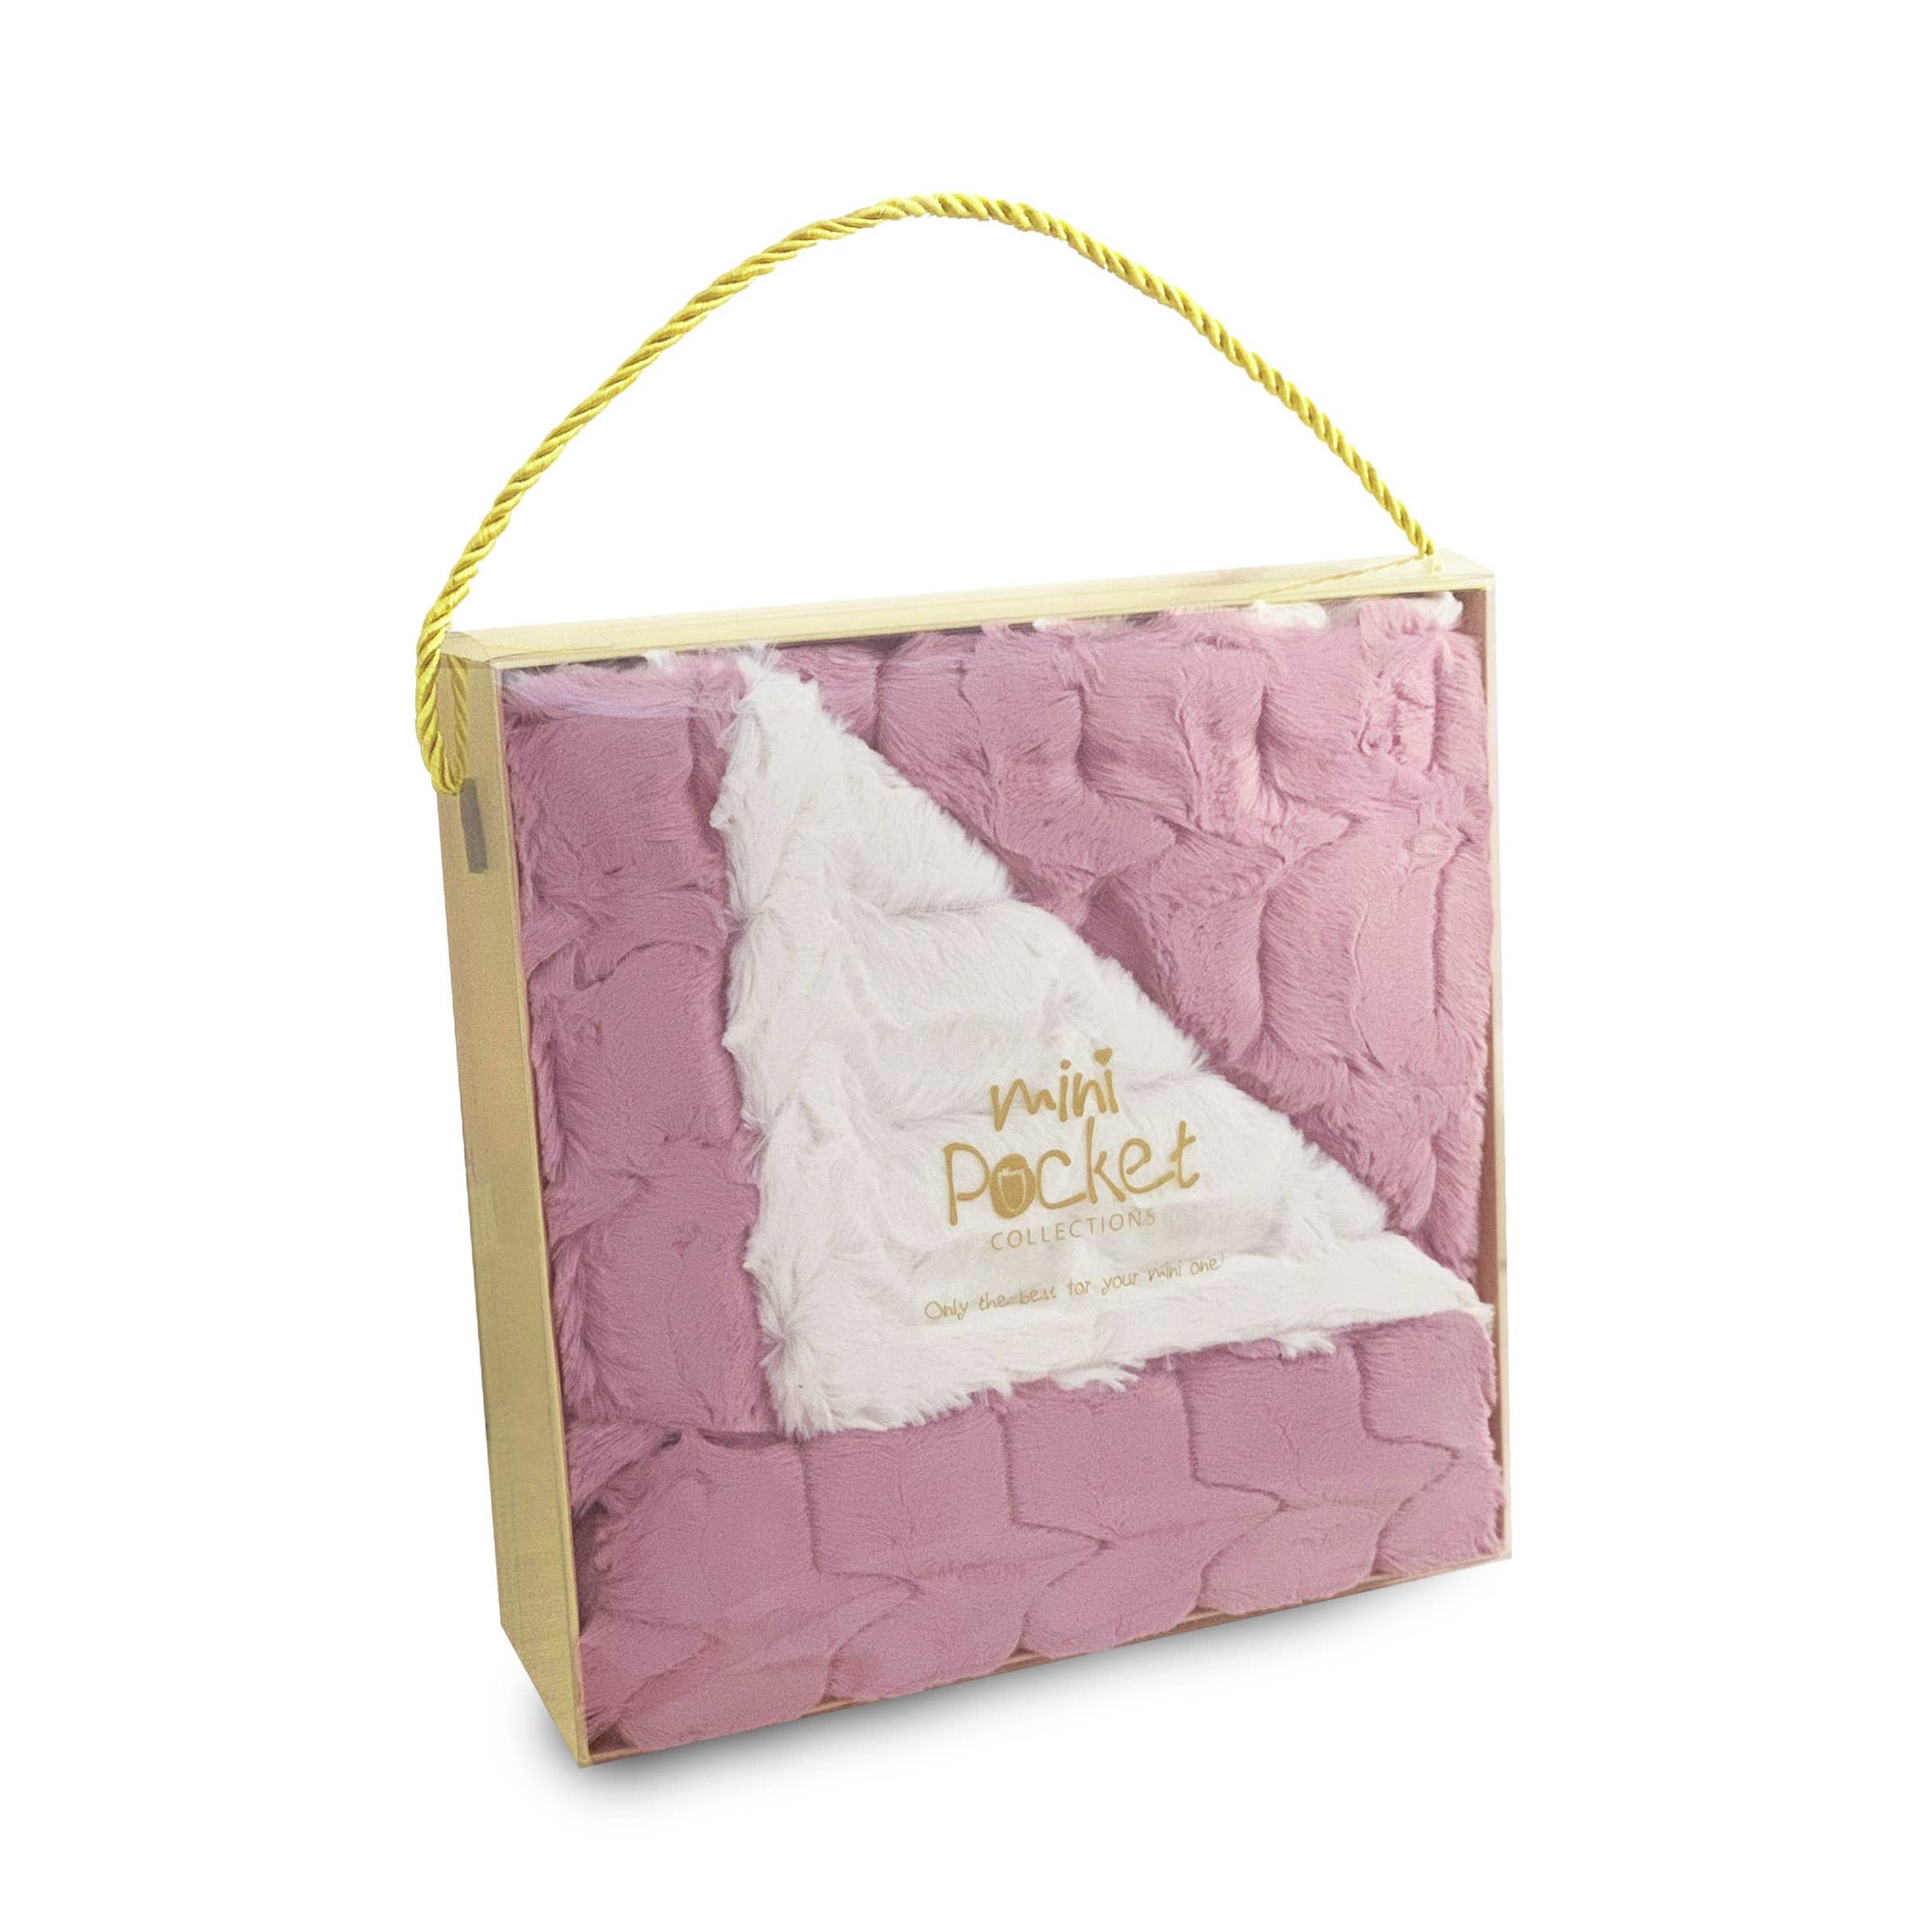 FAUX FUR PINK/CREAM WAVY BABY BLANKET IN GIFT BOX